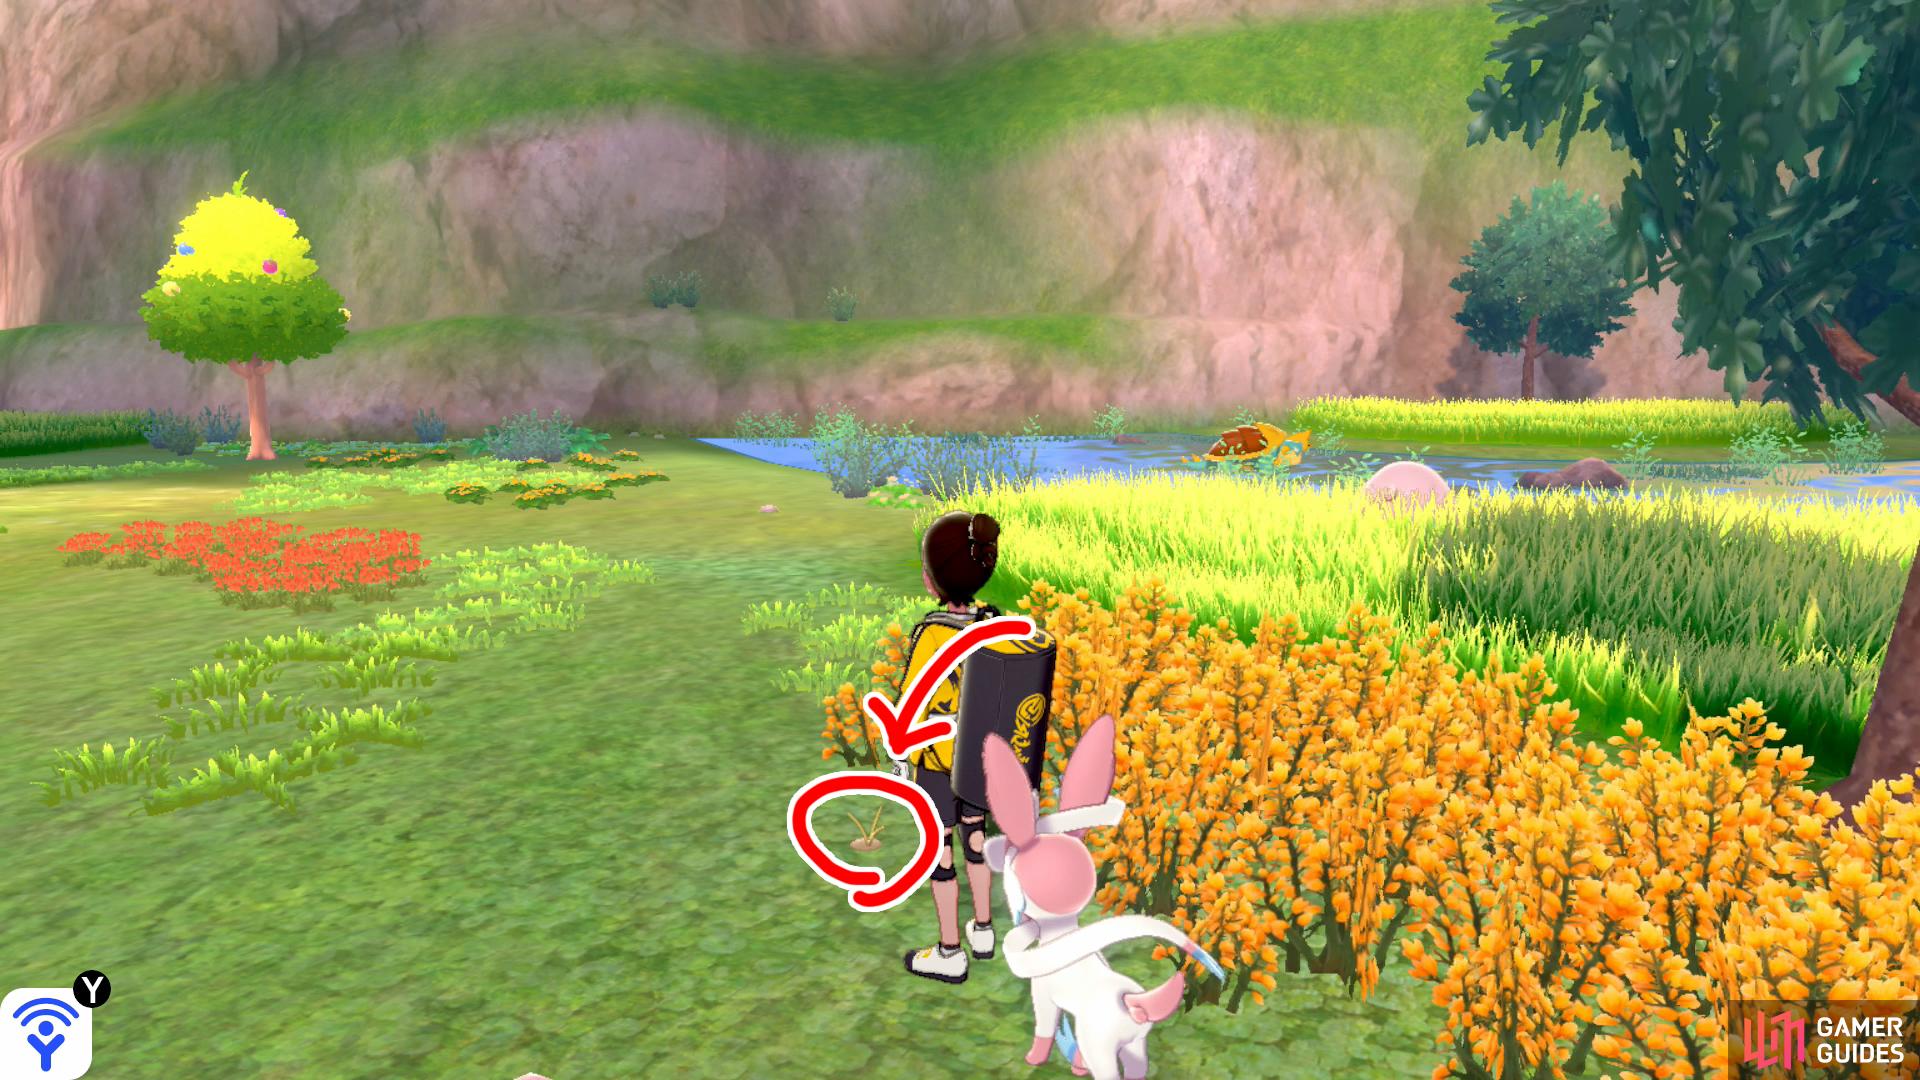 19/20: From Diglett 18, face the wall on the left (while looking in the direction of Brawlers' Cave). There's some tall grass with red flowers in front of it. Go up to the grass and search the yellow grass on its left.